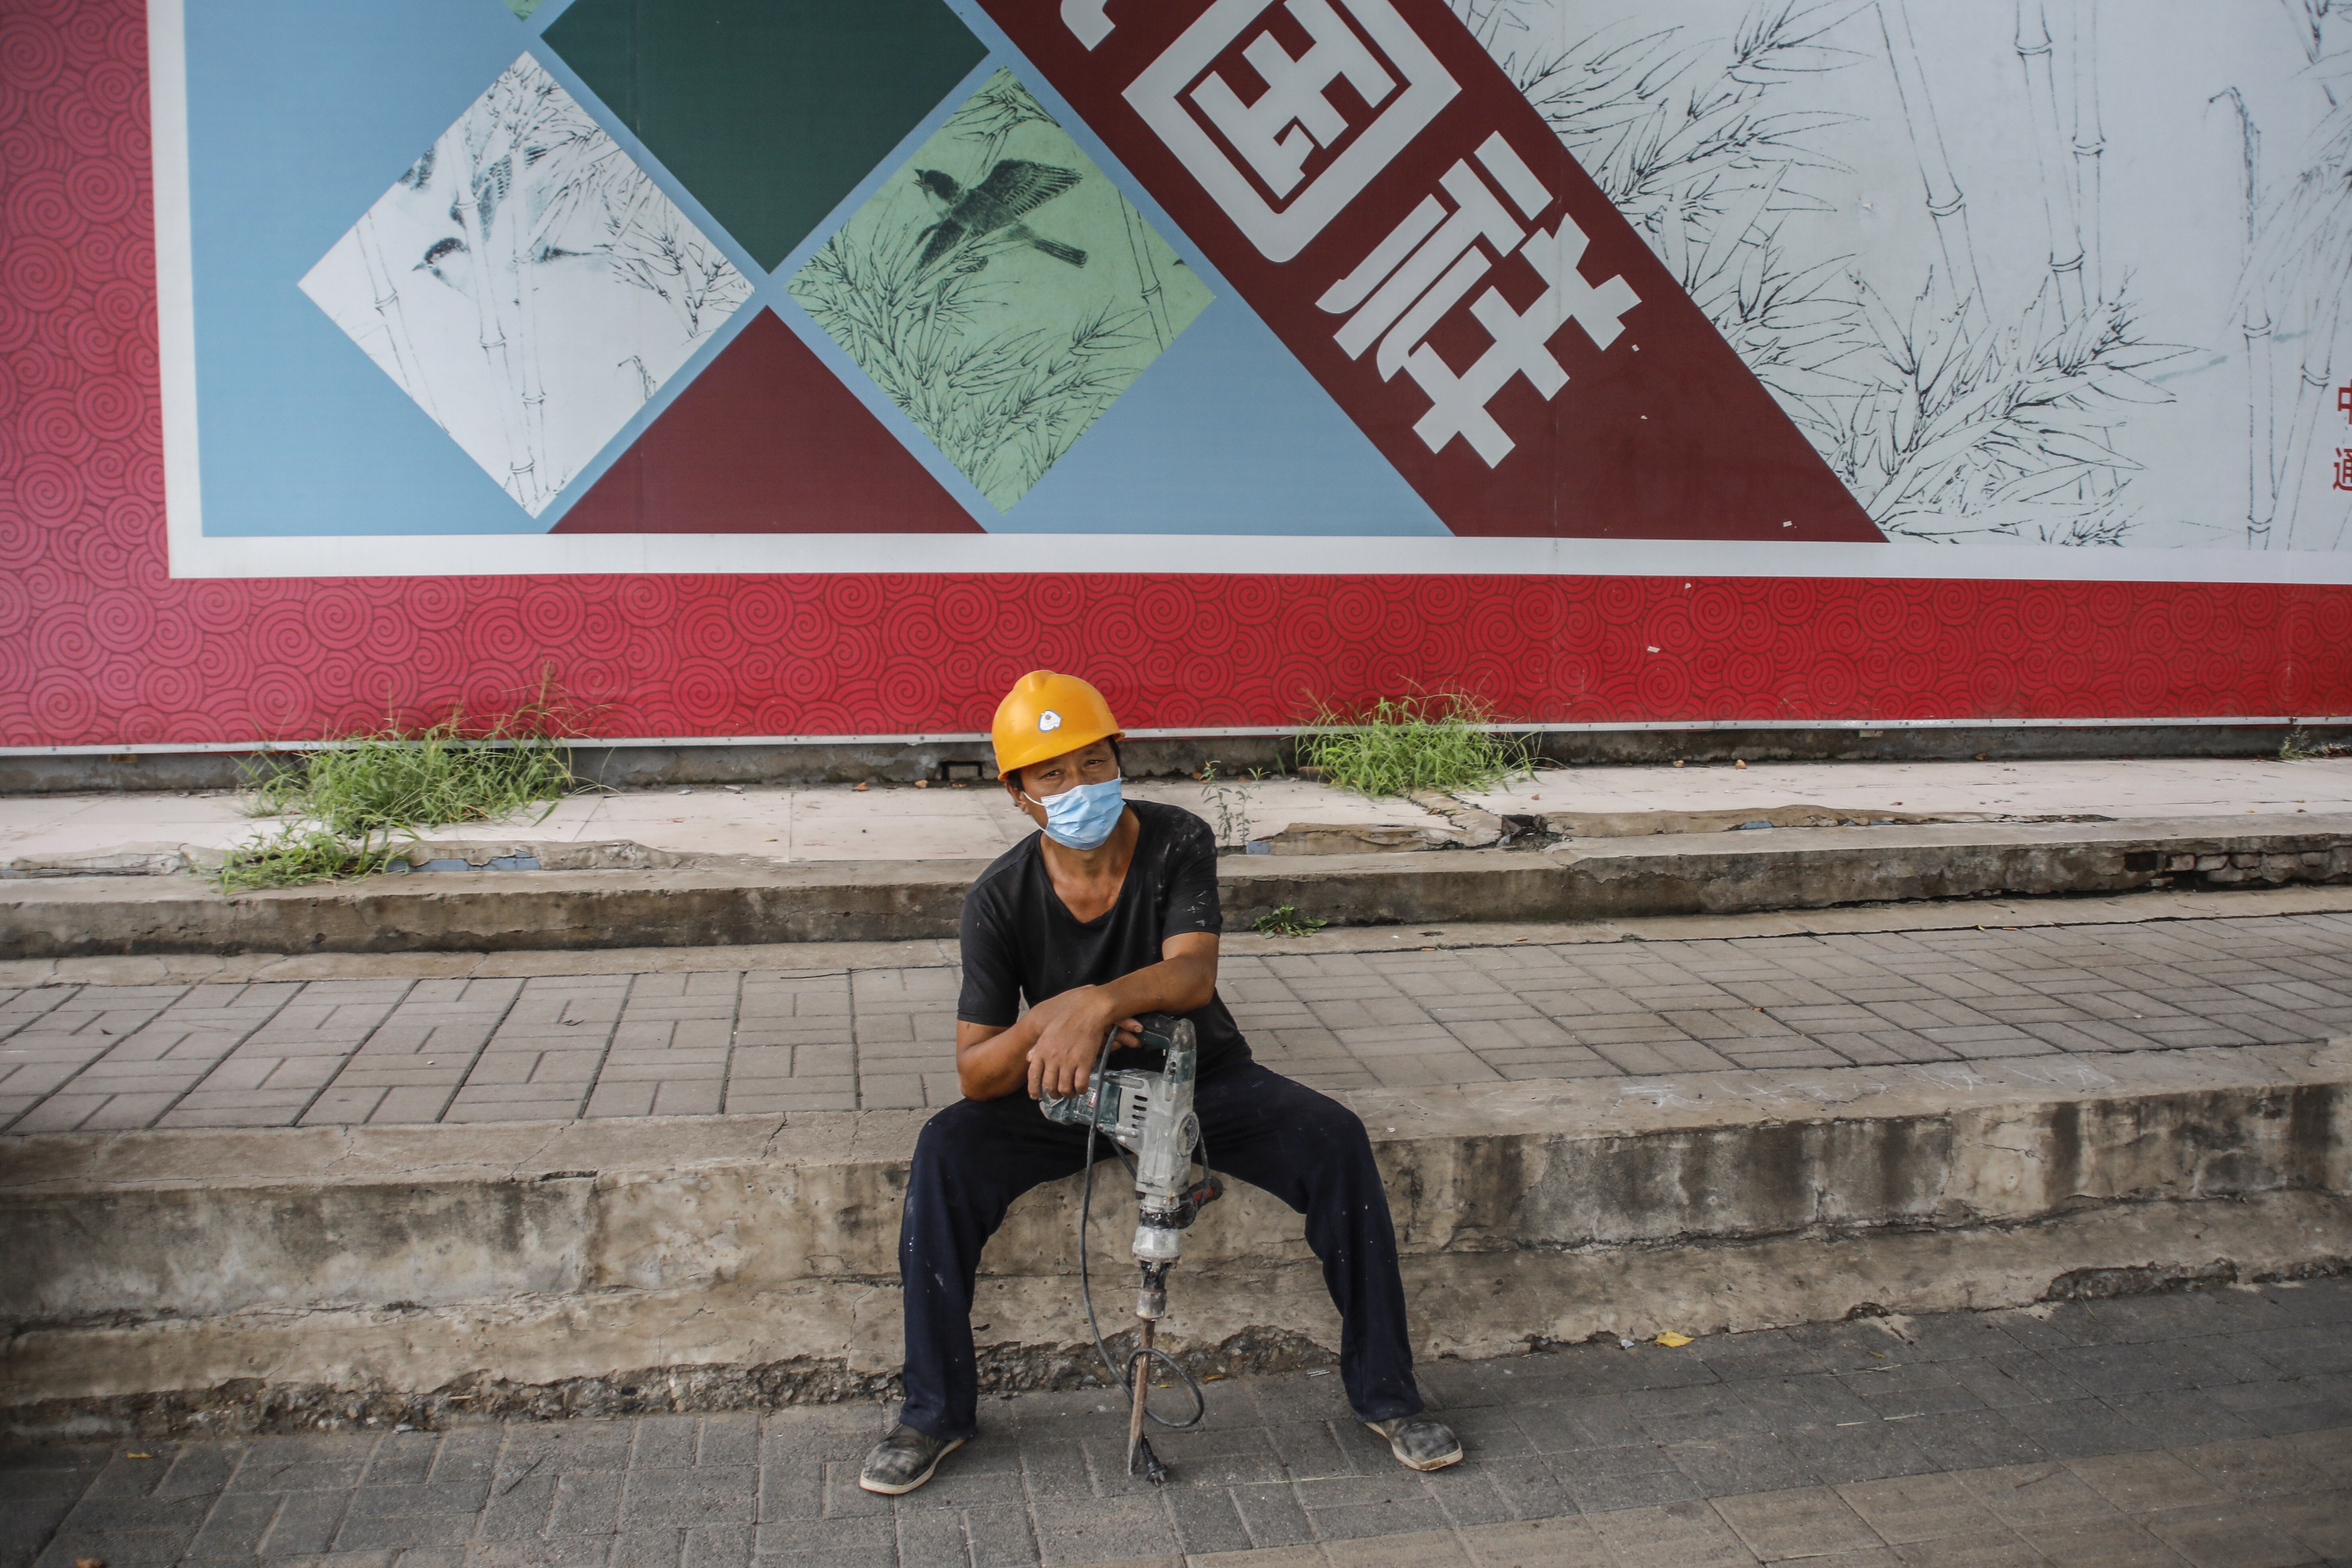 A migrant labourer waits for work on the street in Beijing on August 17. The prospect of a protracted recession and a jobless recovery thereafter could make life especially tough for firms and workers not integrated into the digital world. Photo: EPA